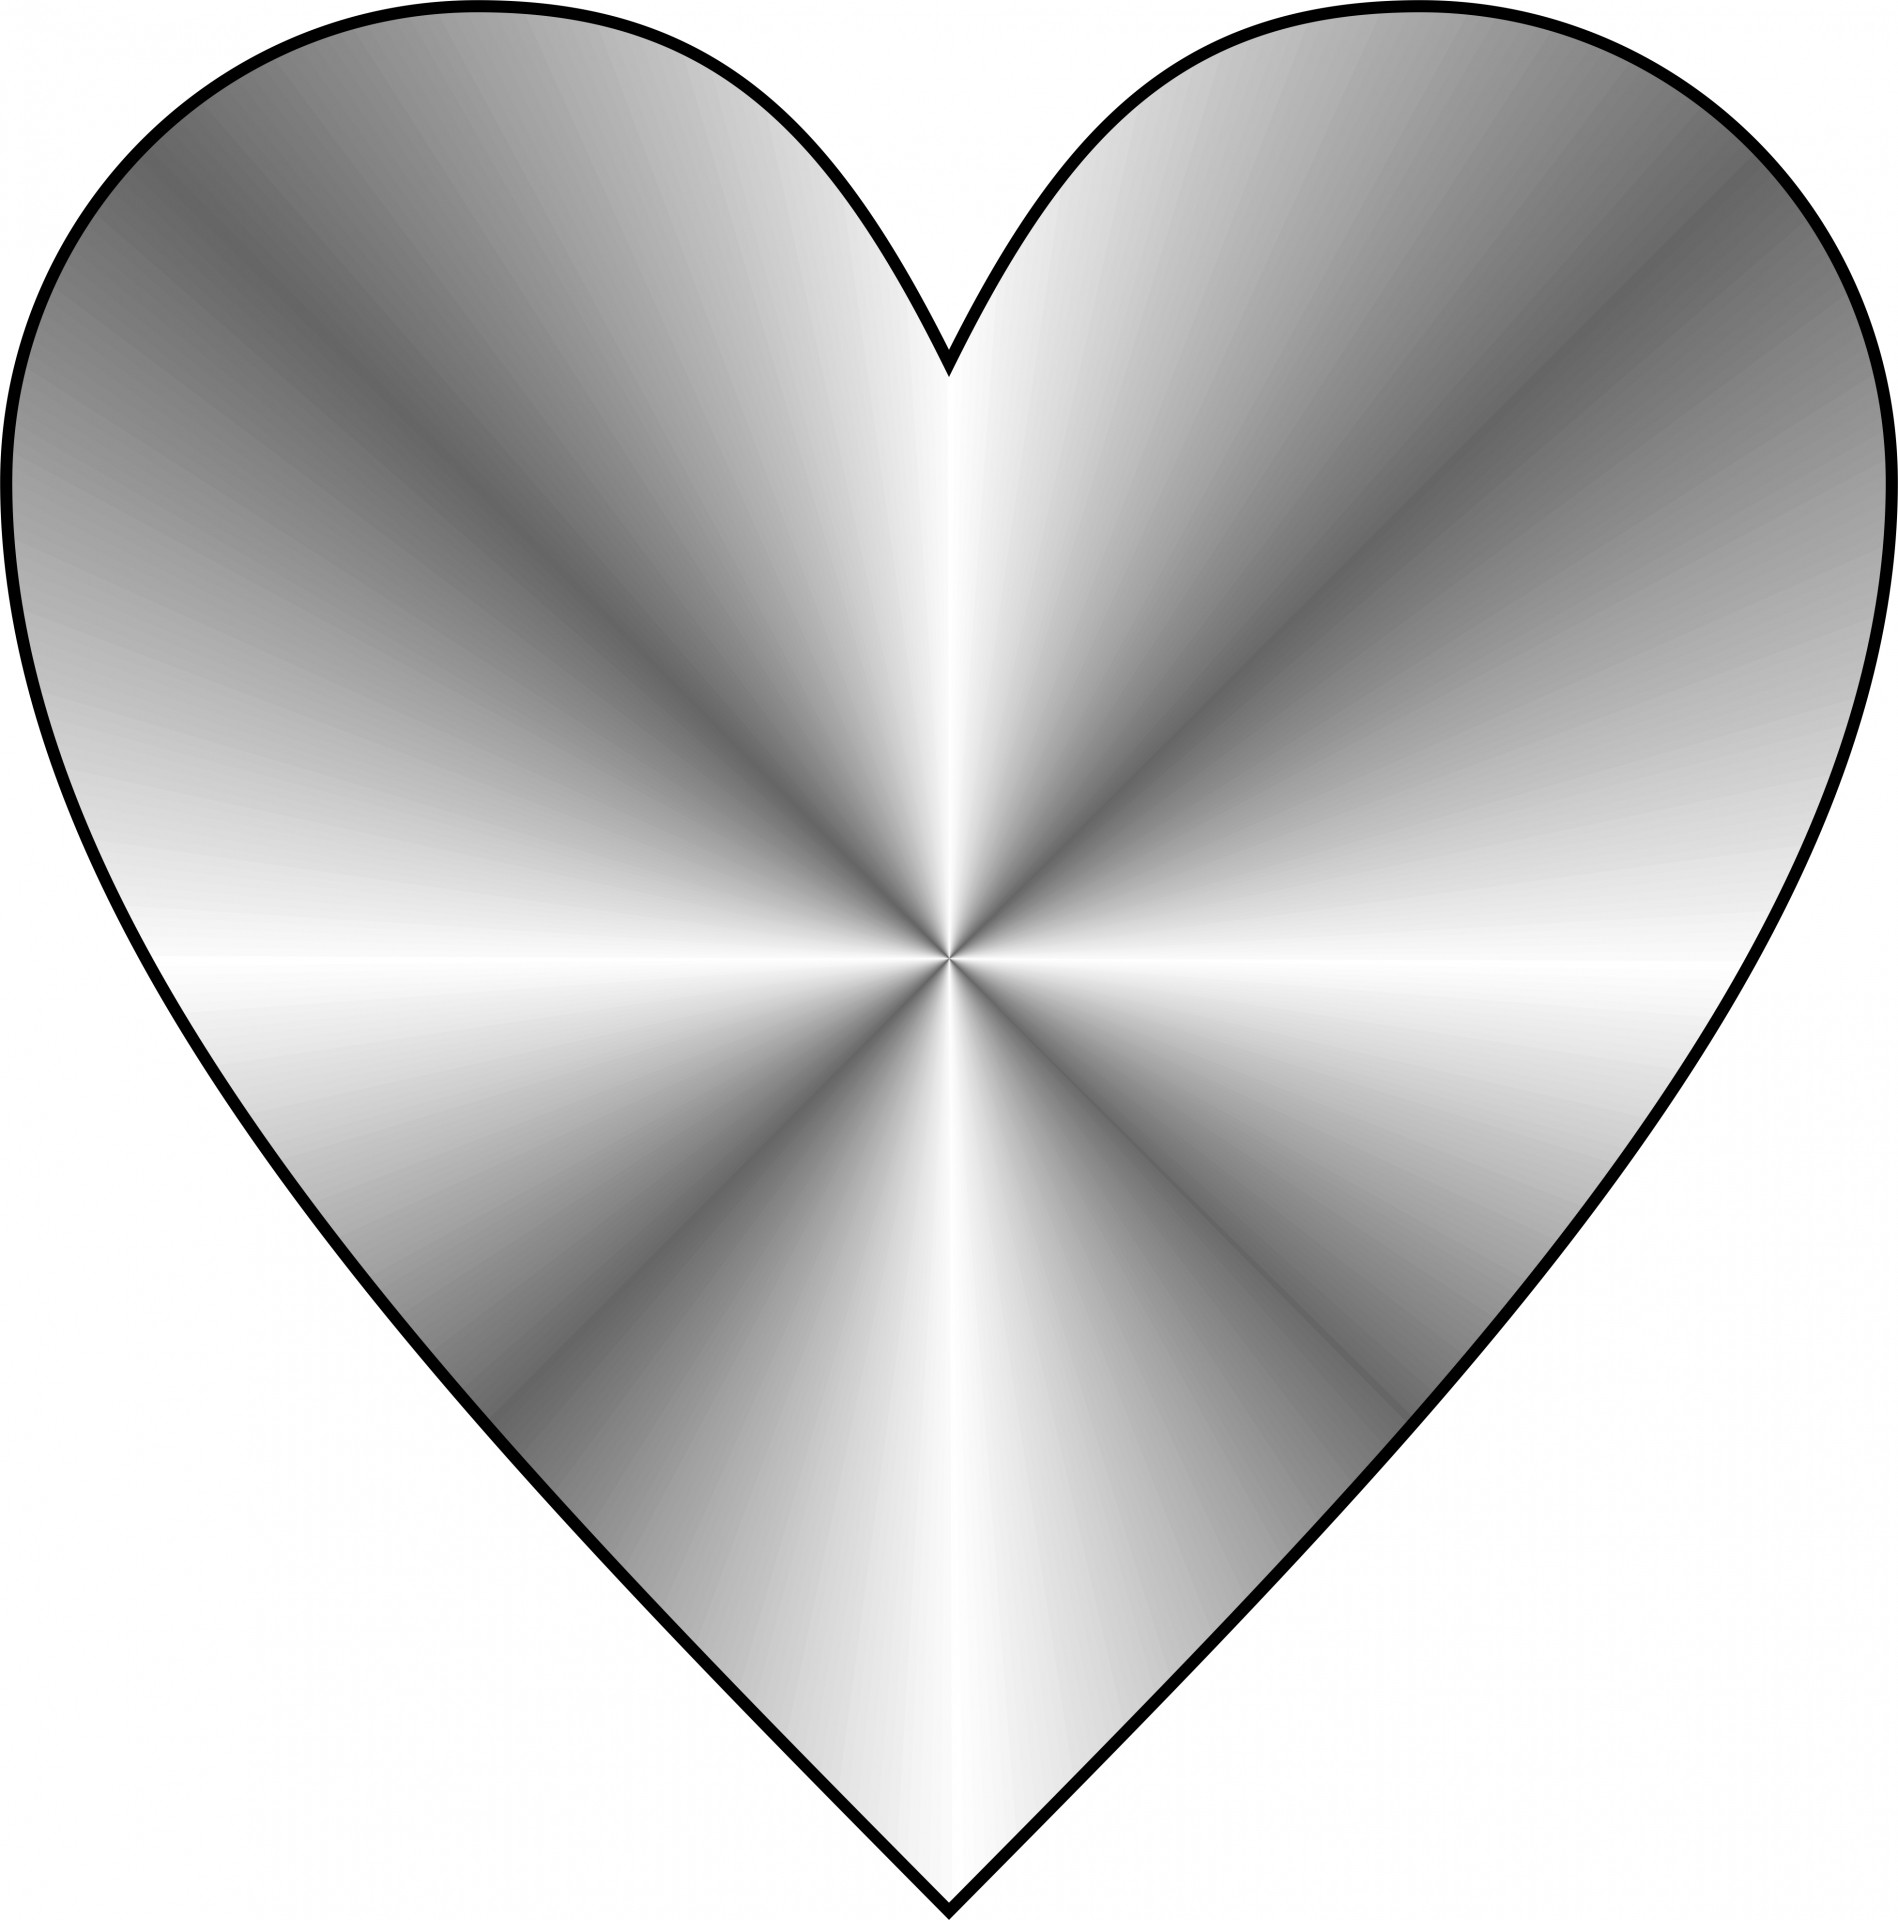 conical silver heart free photo